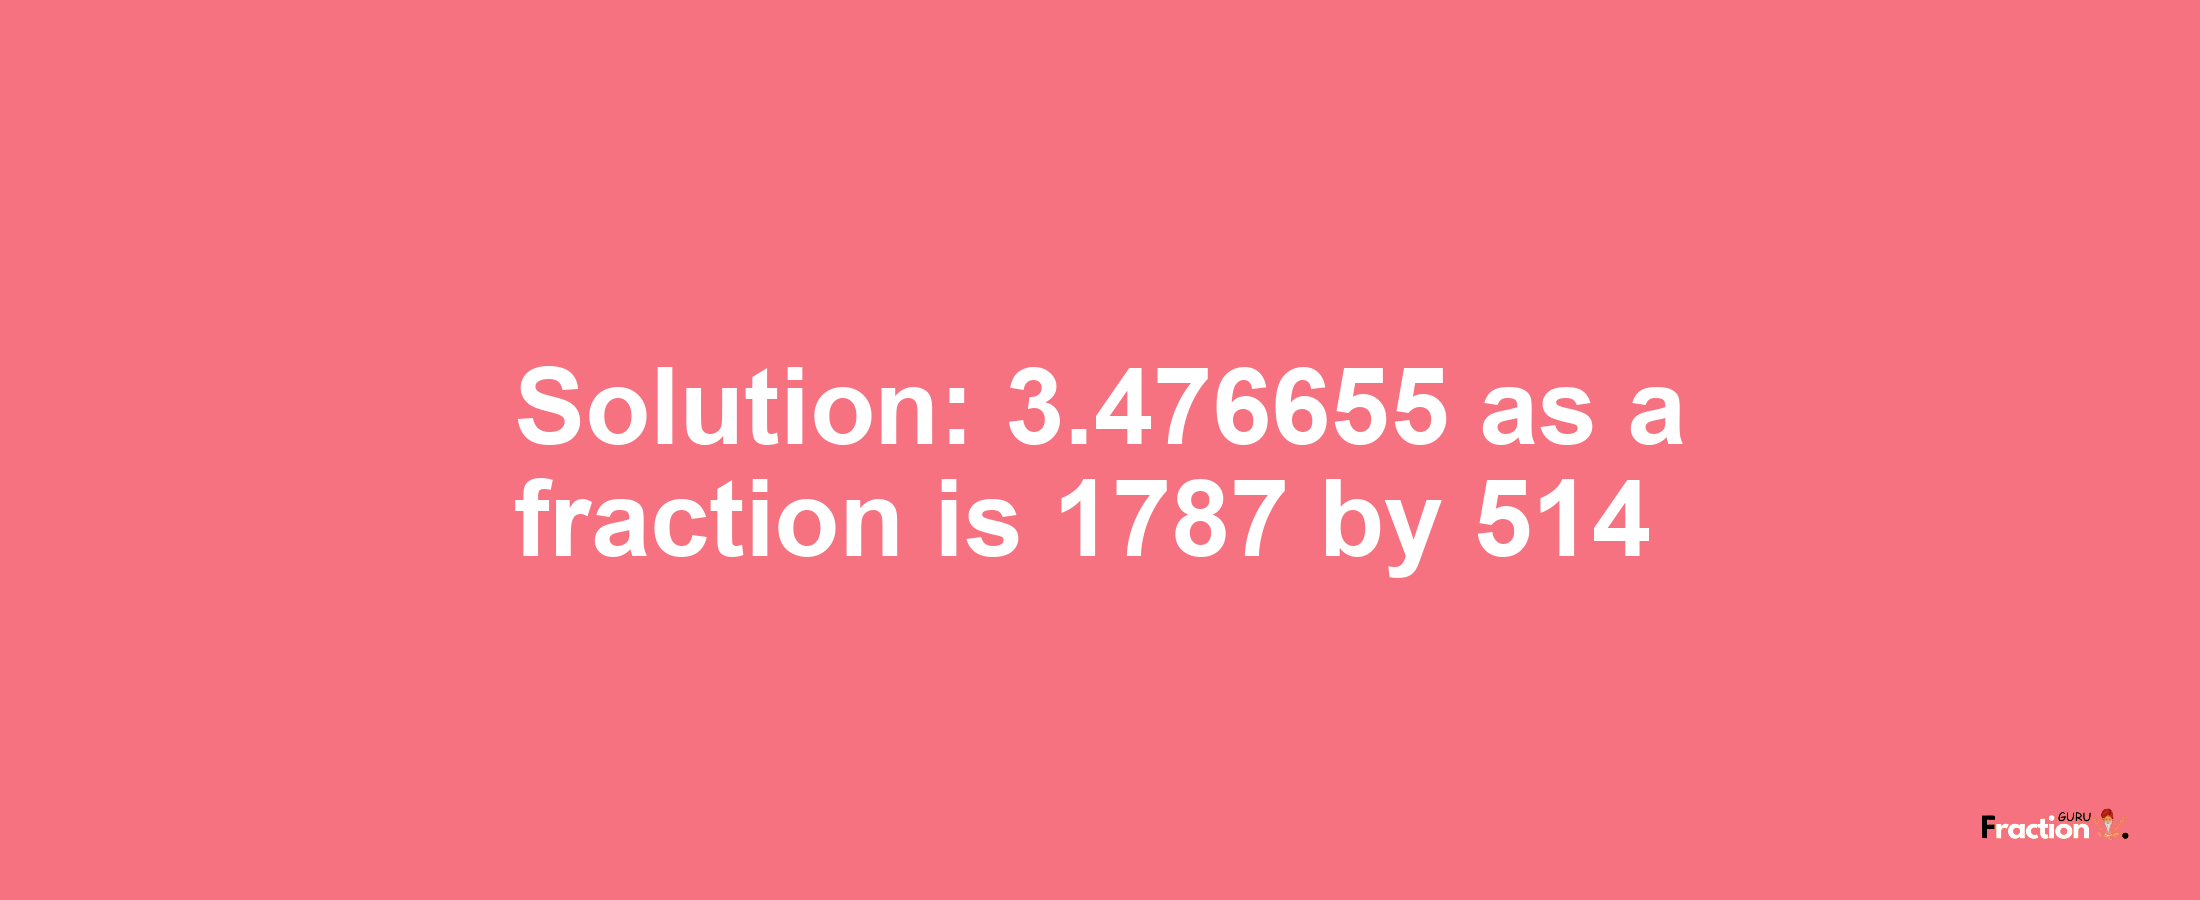 Solution:3.476655 as a fraction is 1787/514